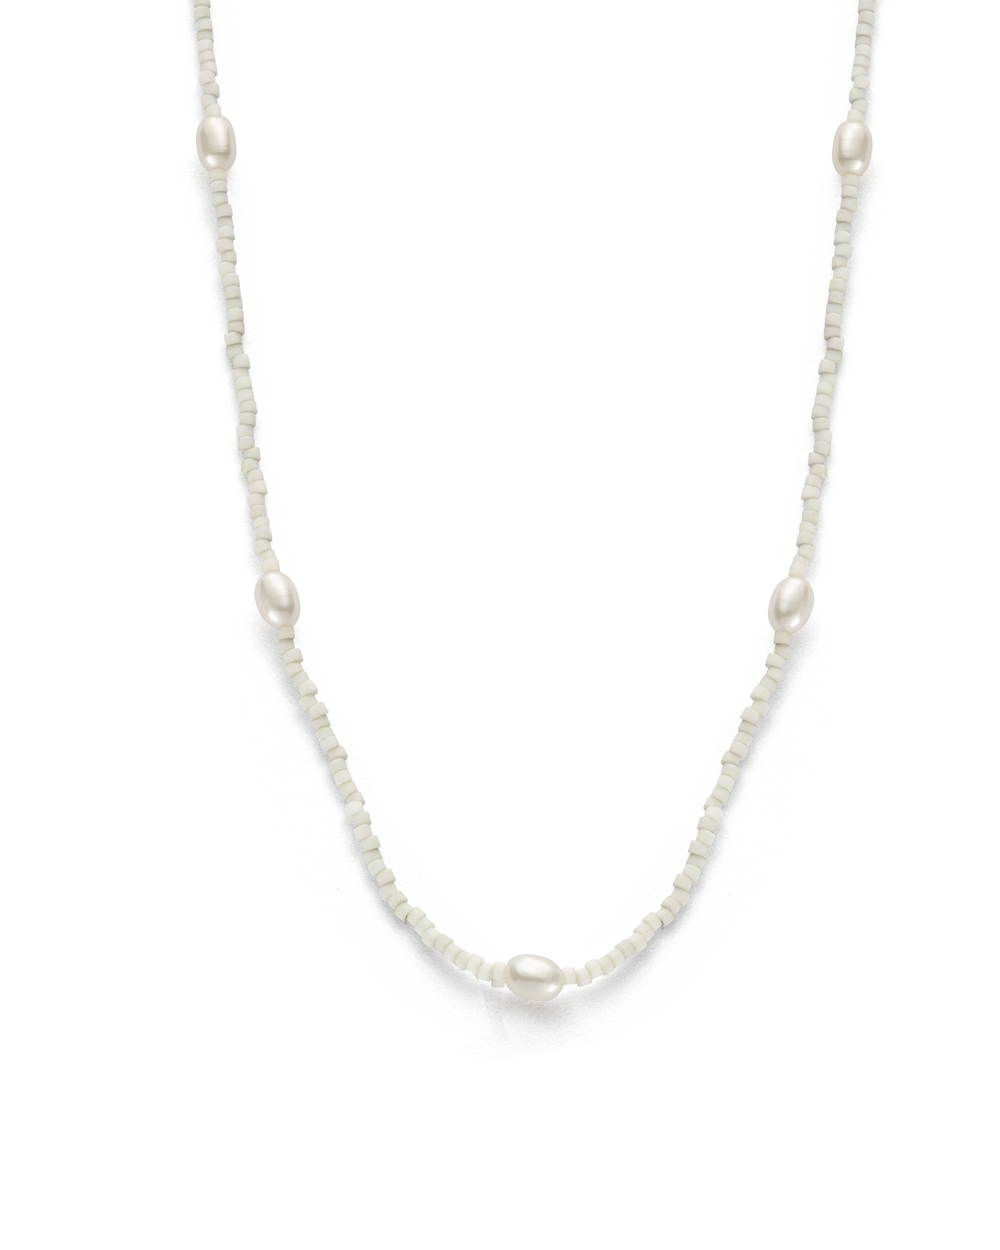 VISTA PEARL NECKLACE (STERLING SILVER)